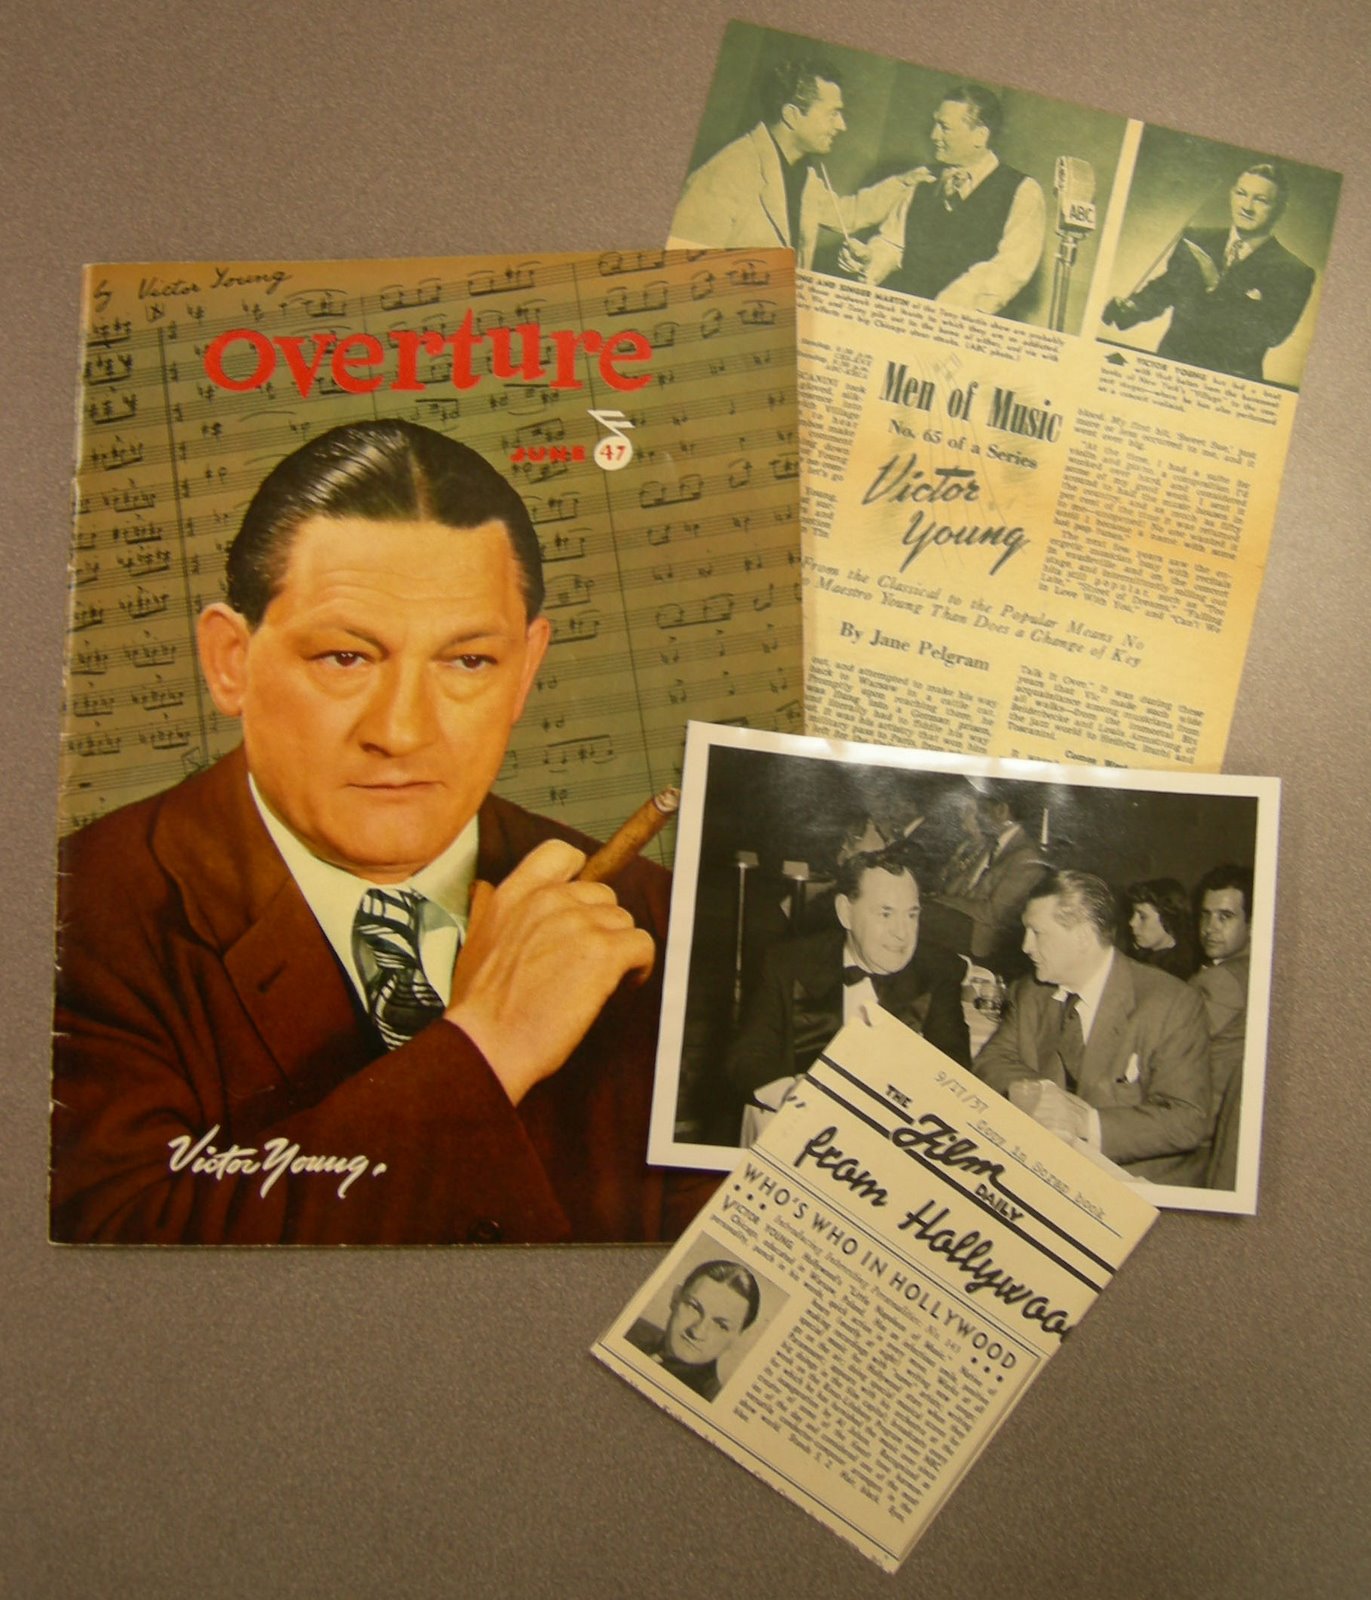 Newspaper clippings and a photograph of Victor Young circa 1937